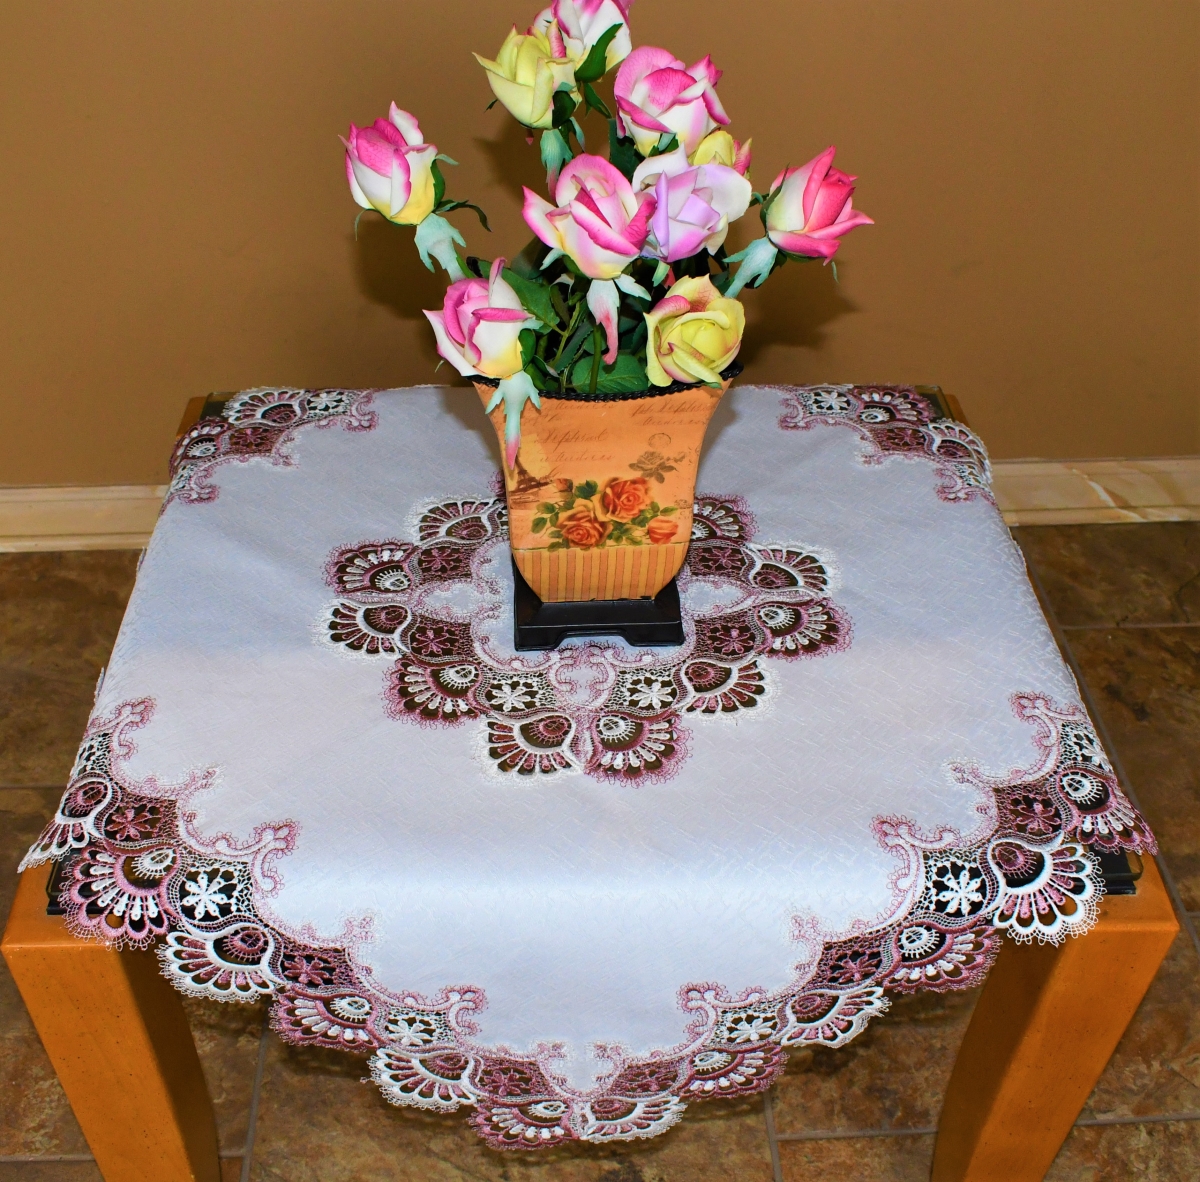 Picture of Sinobrite H8139-P-42x42SQ 42 x 42 in. Purple European Lace with White Antique Fabric Square Table Topper